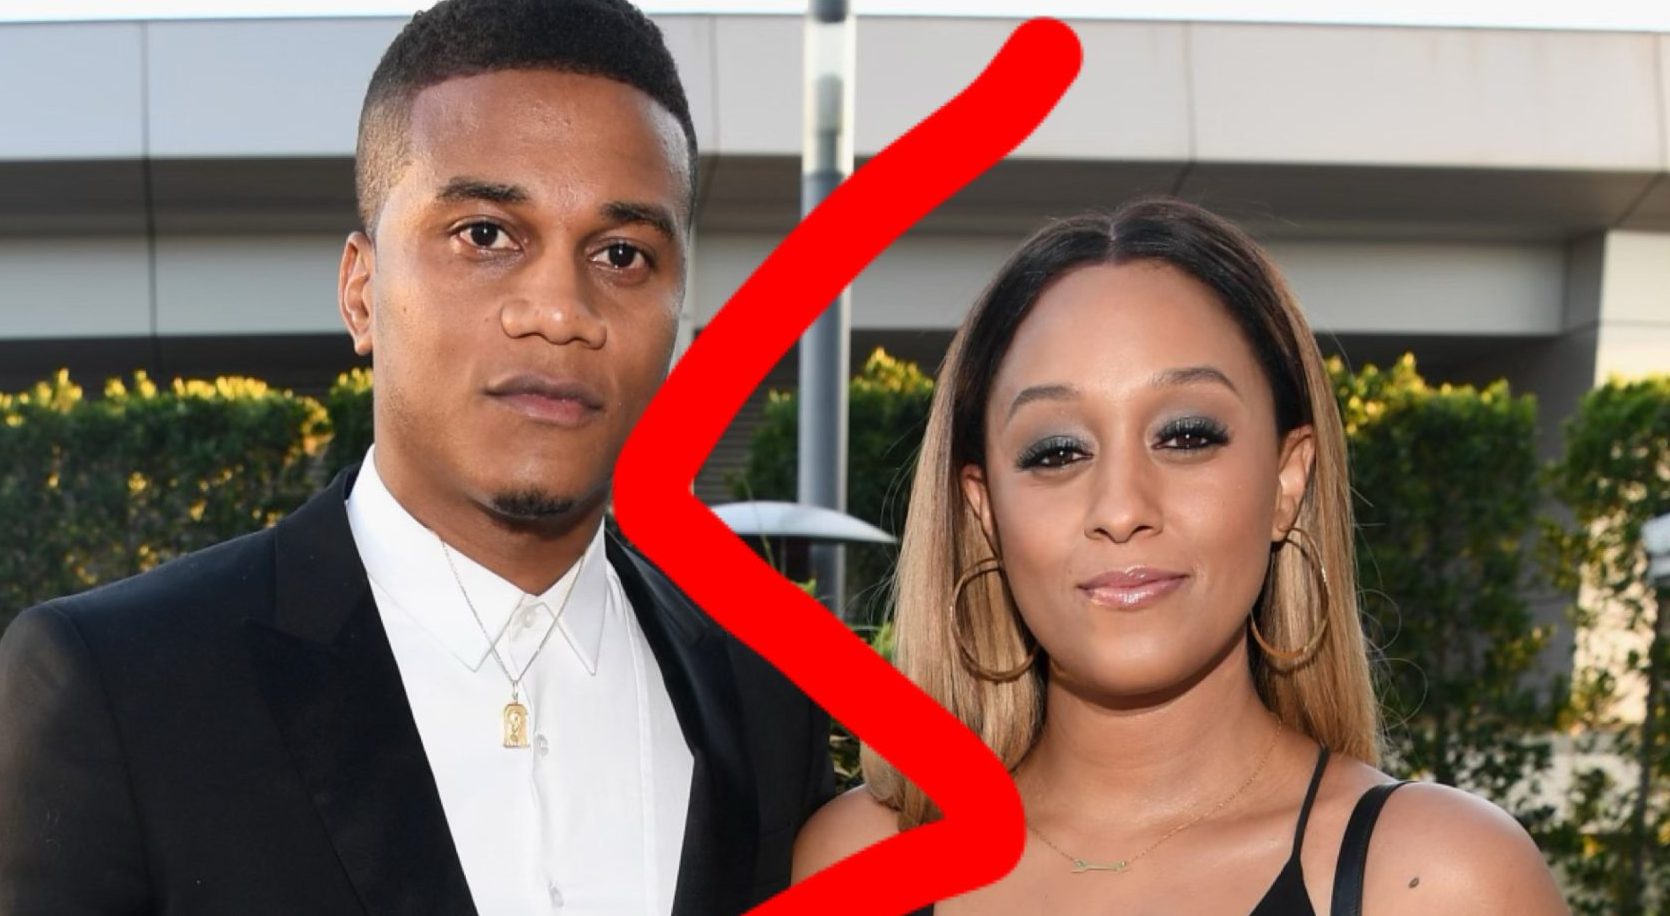 Tia Mowry files for divorce from Cory Hardrict